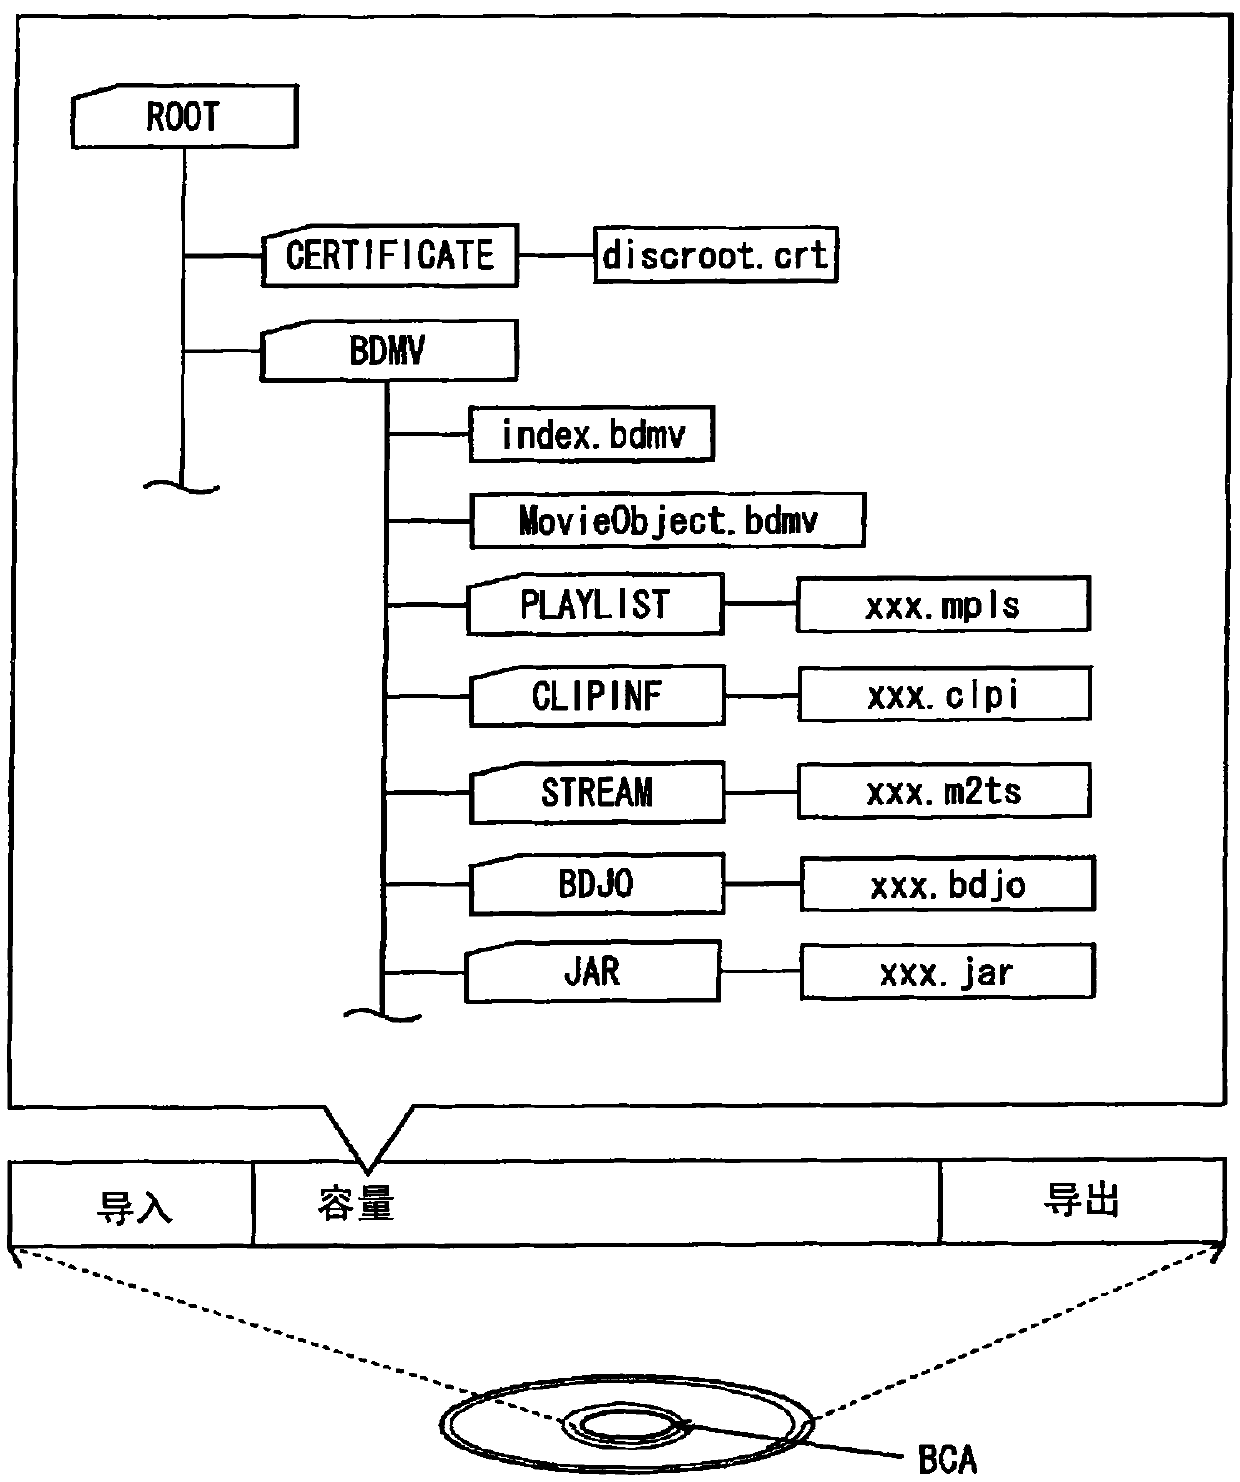 Reproduction device, reproduction method, and program